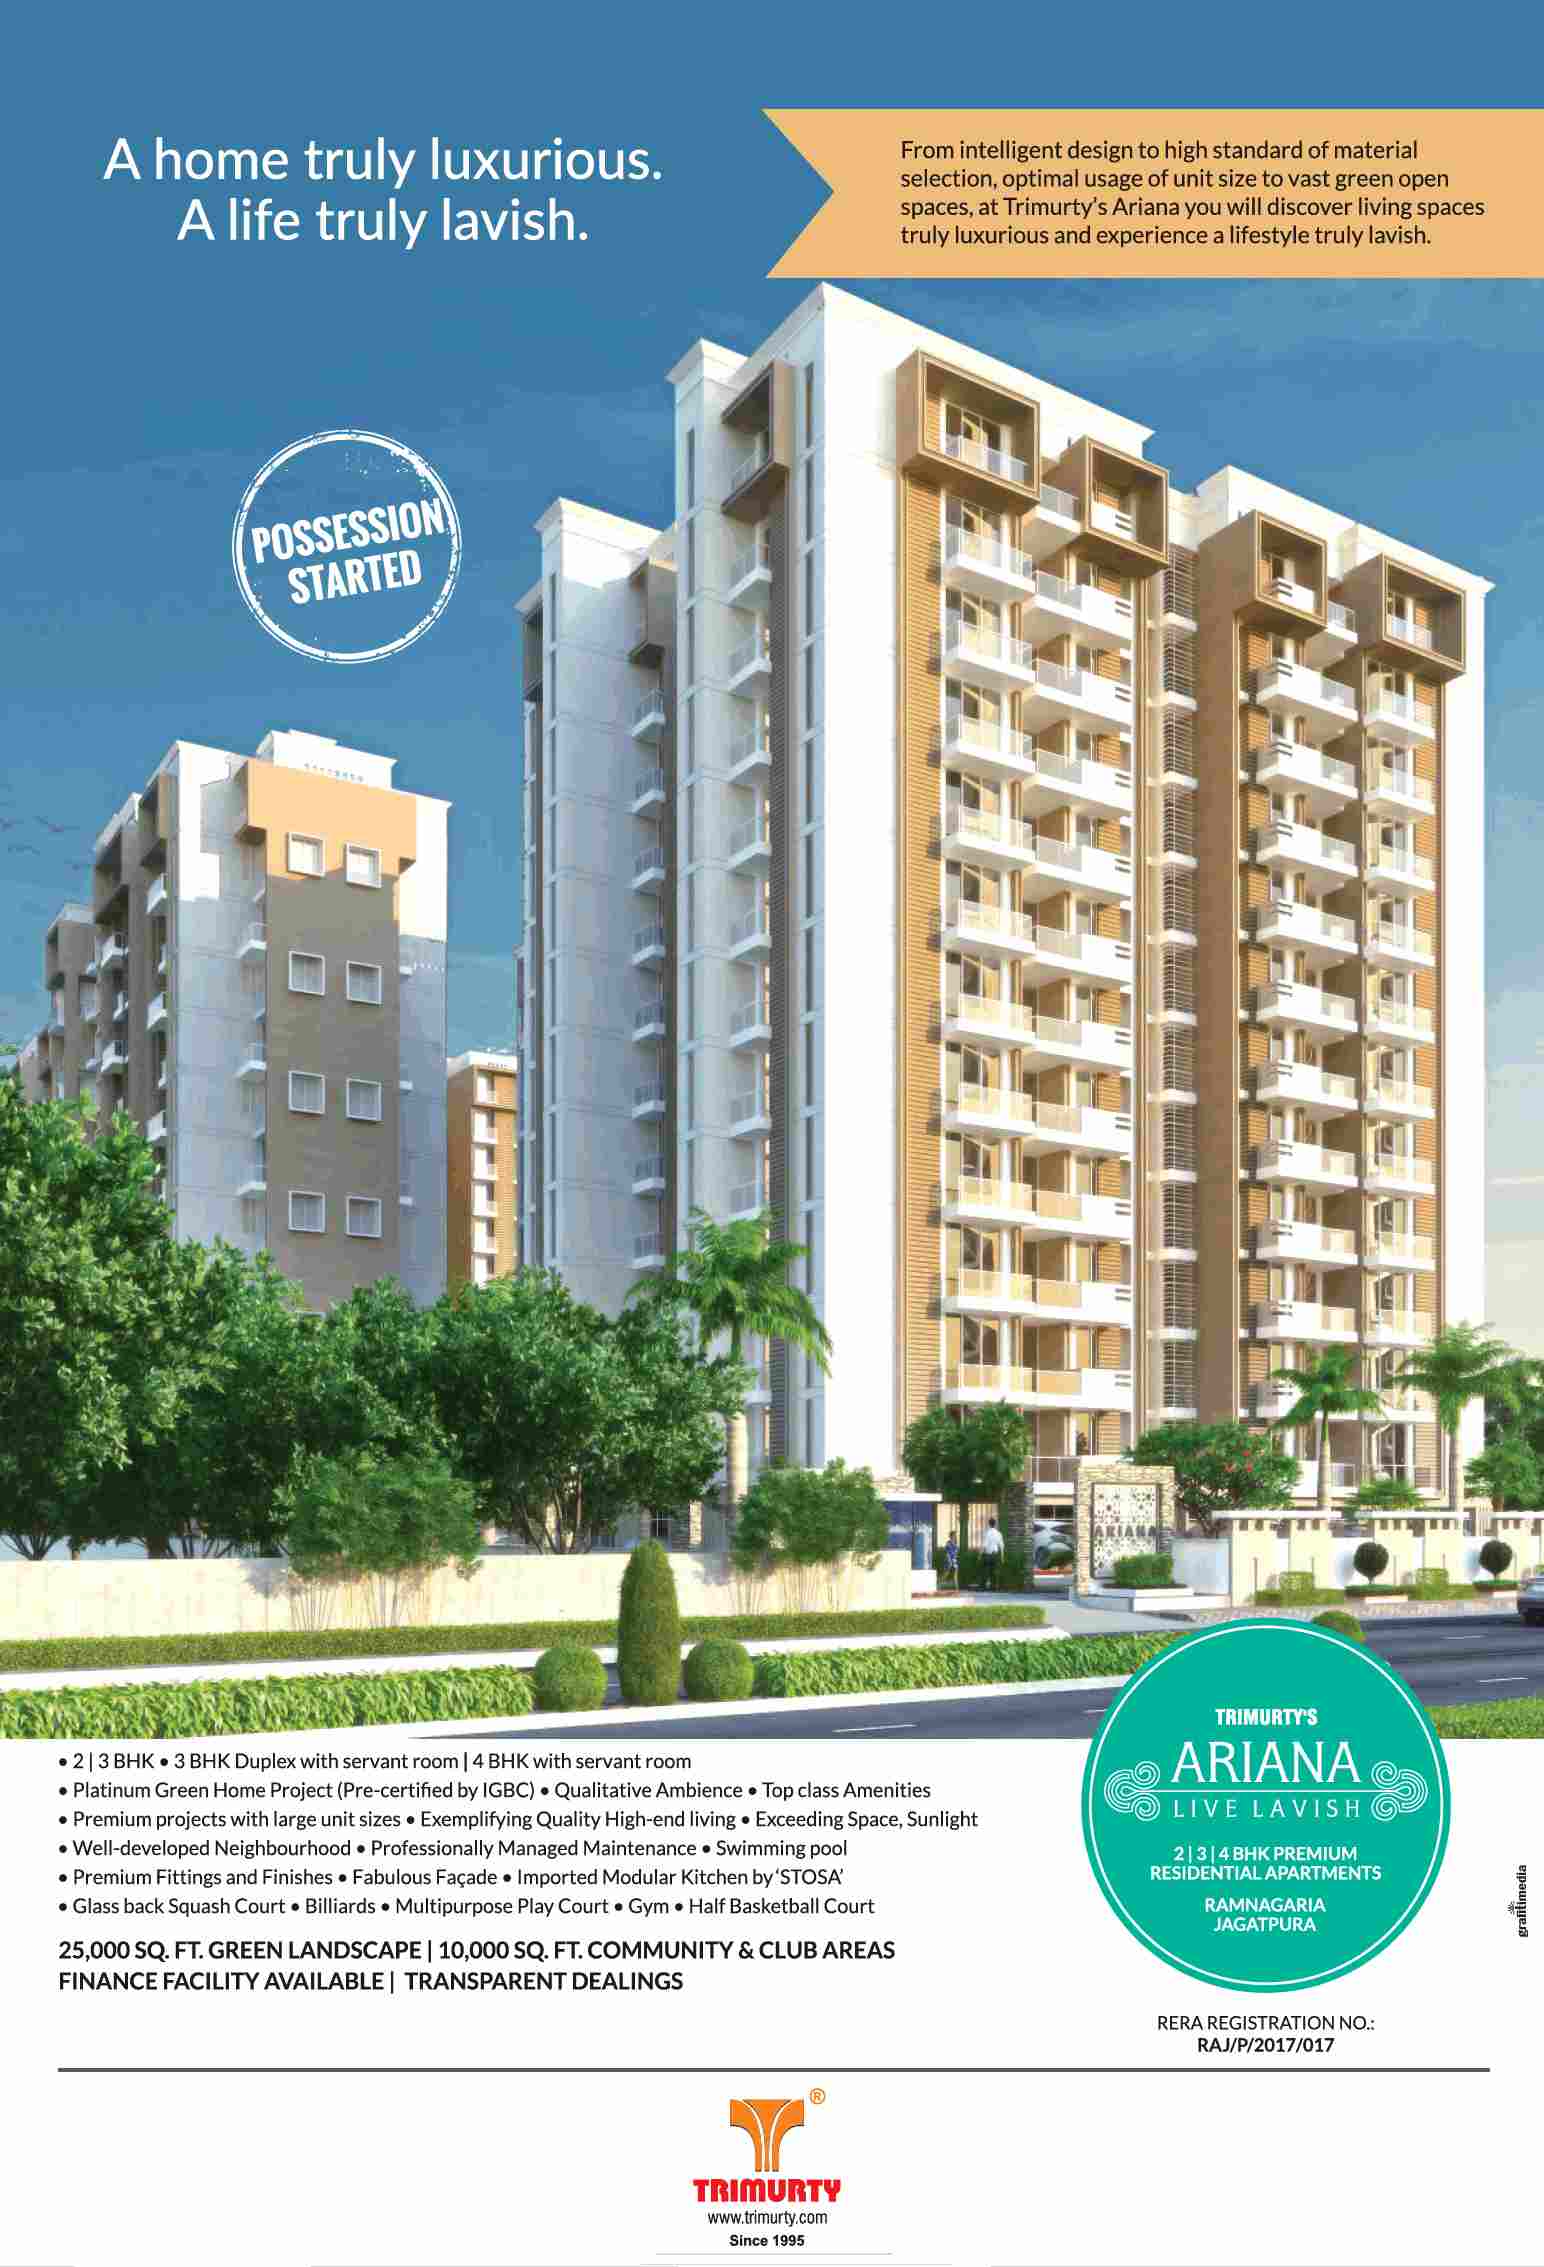 Live a truly luxurious and lavish life at Trimurty Ariana in Jaipur Update